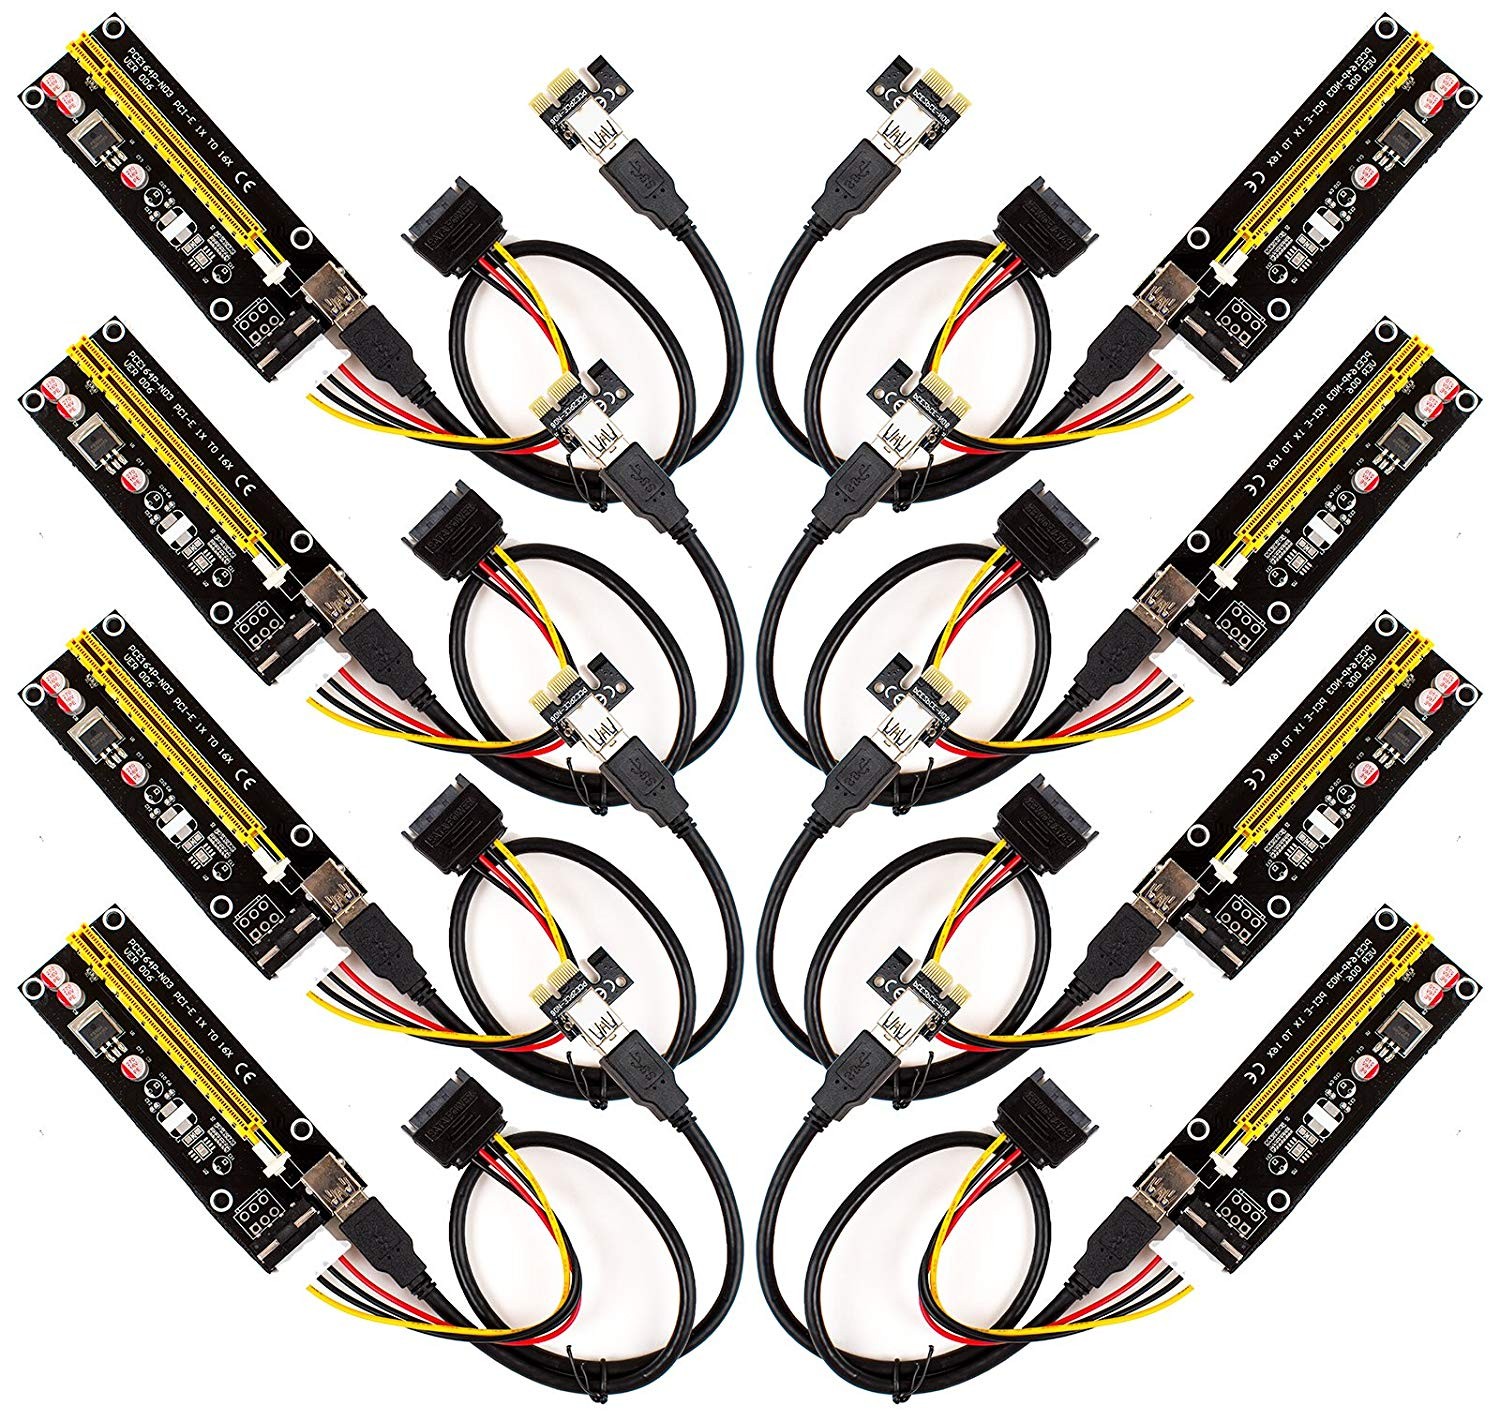 Amazon 6 Pack PCI E 16x to 1x Powered Riser Adapter Card w 50cm USB 3 0 Extension Cable & MOLEX to SATA Power Cable GPU Riser Extender Cable